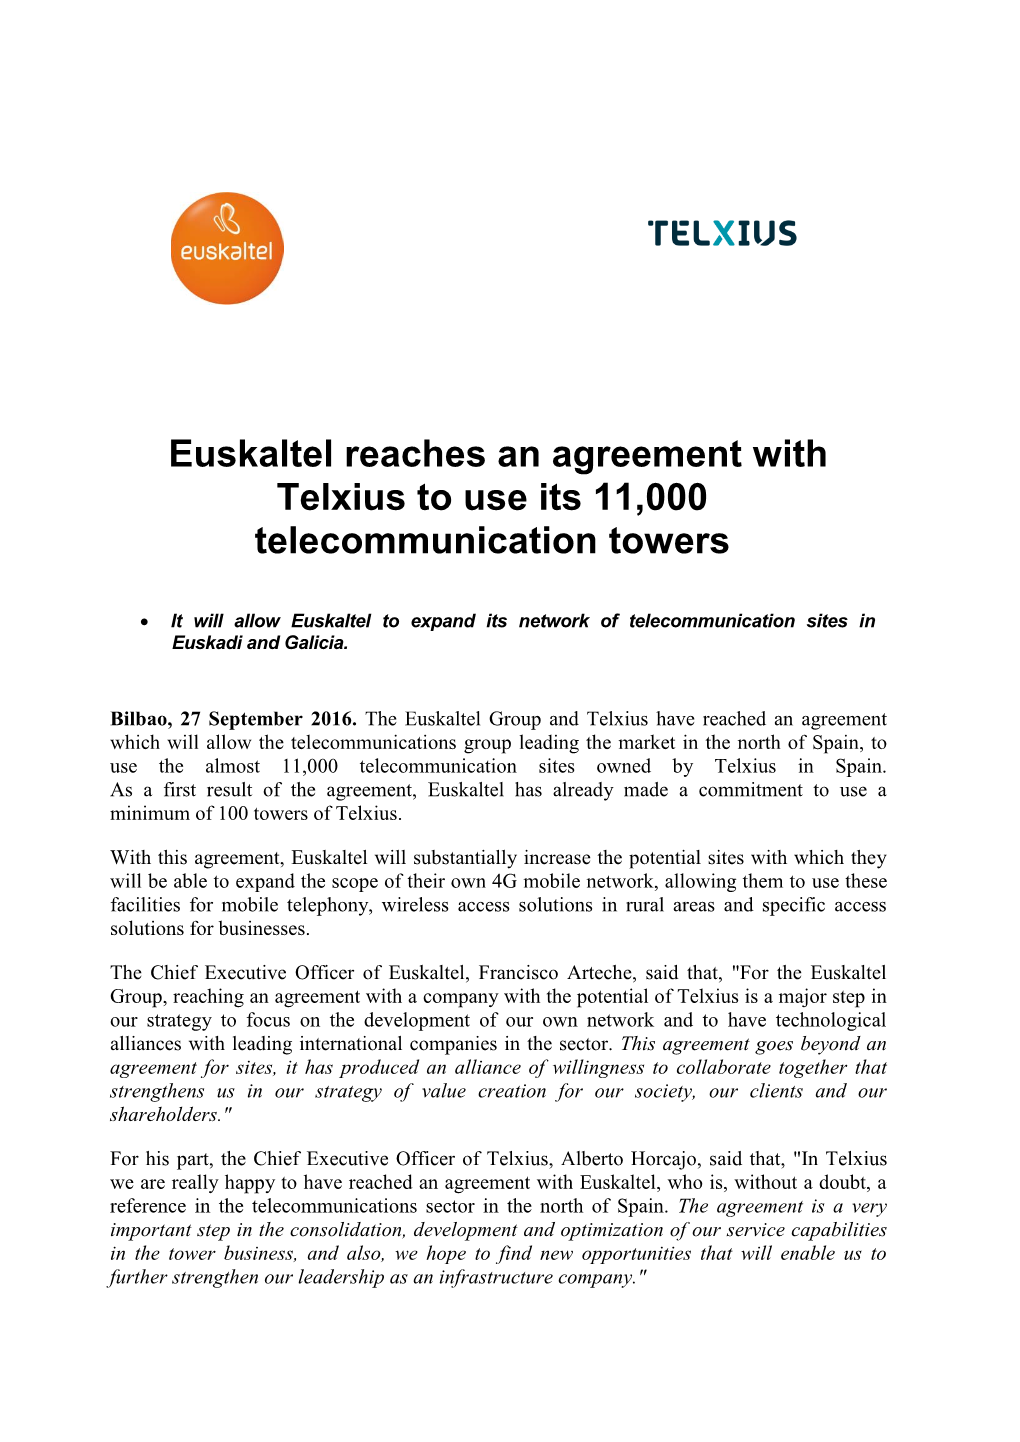 Euskaltel Reaches an Agreement with Telxius to Use Its 11,000 Telecommunication Towers